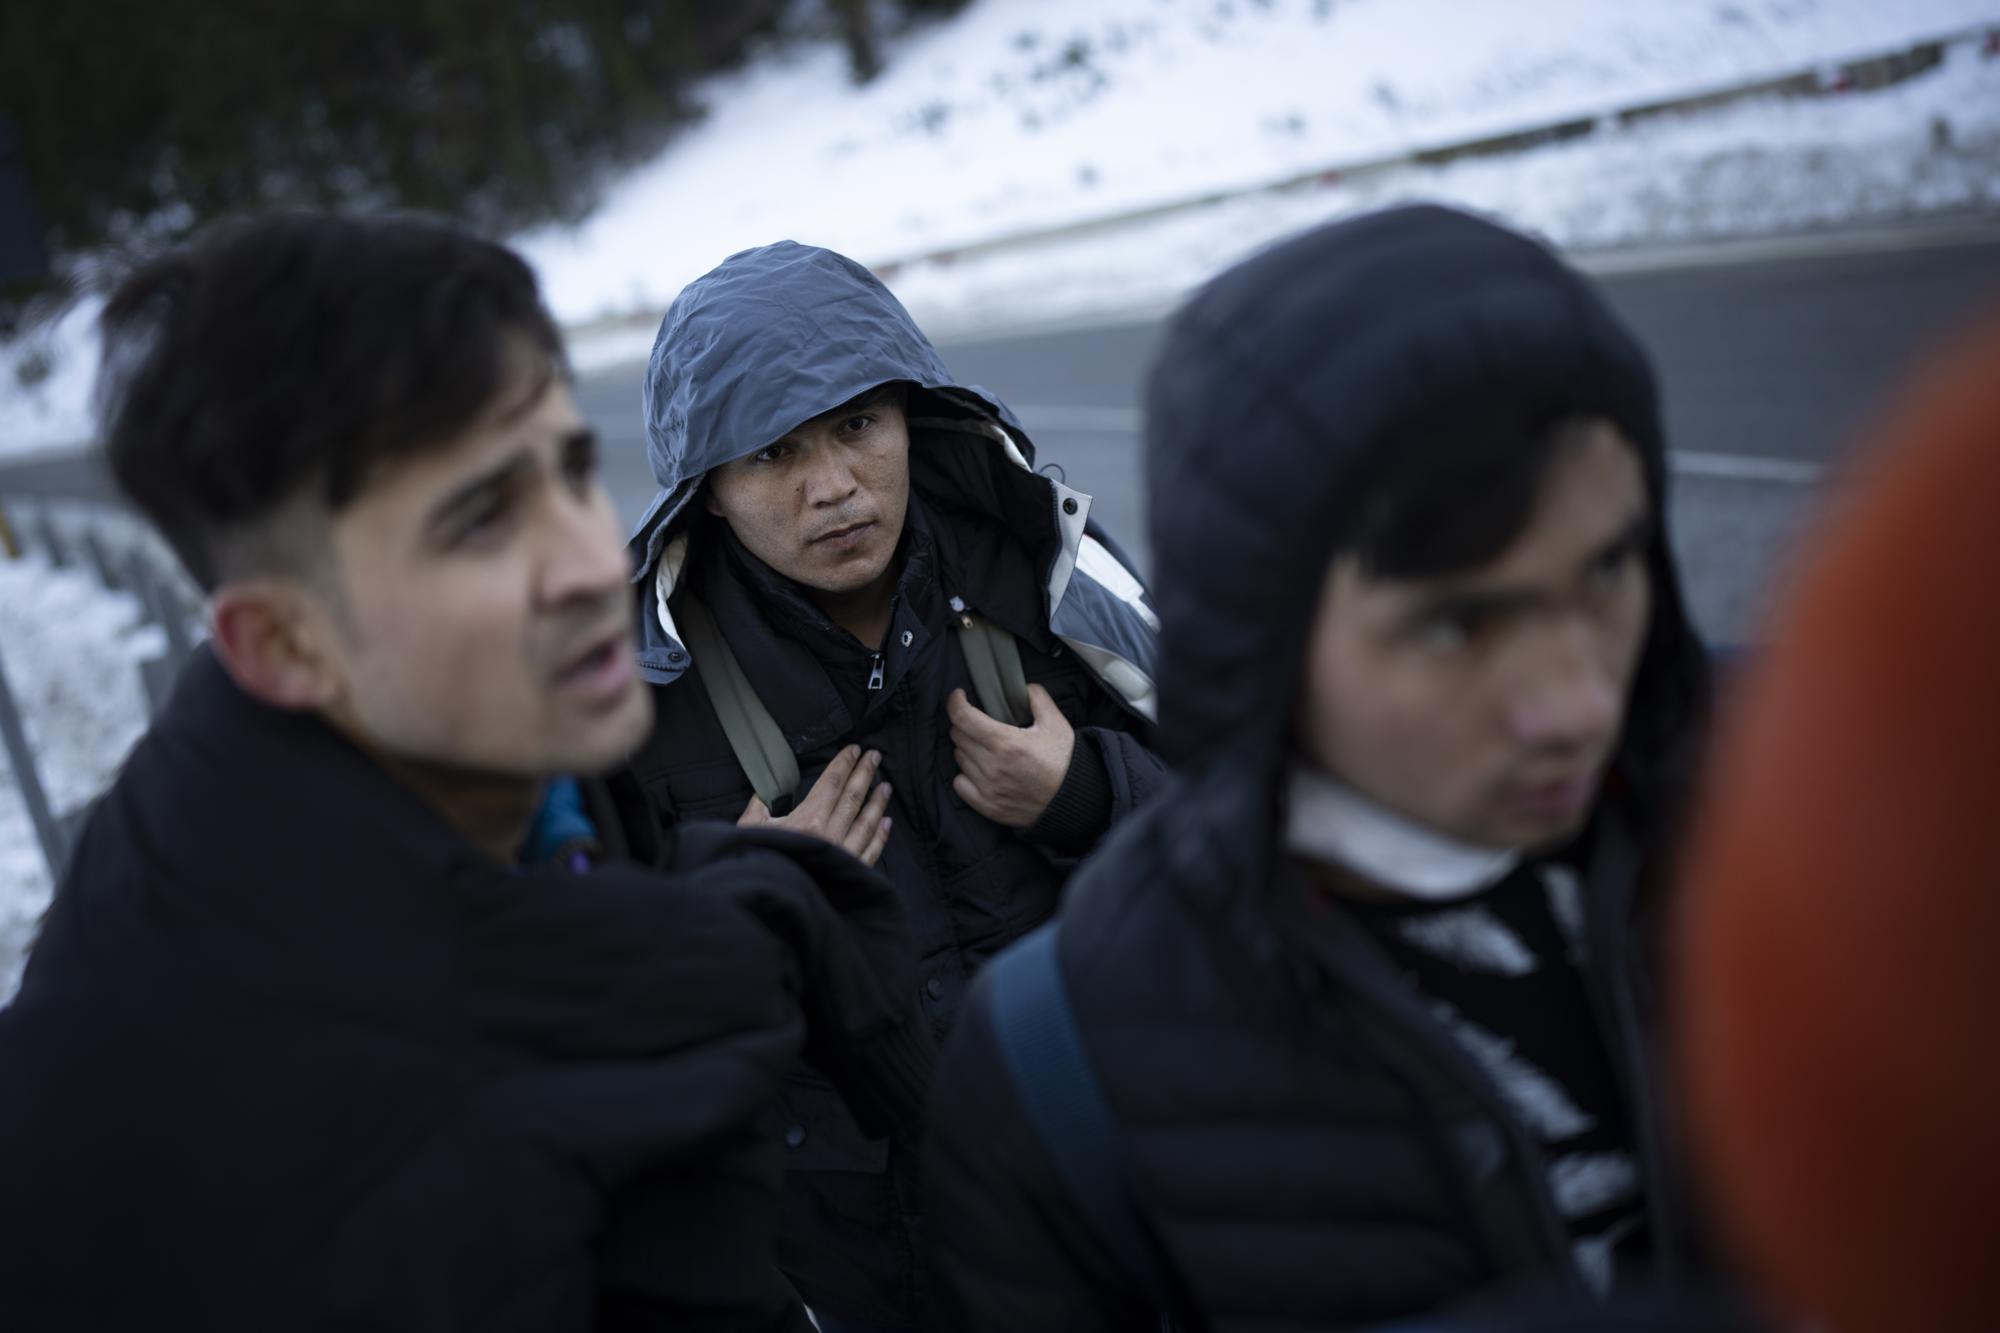 Afghan migrants headed to France from Italy walk along a mountain road leading to the French-Italian border, Wednesday, Dec. 15, 2021. When the Taliban seized power in Afghanistan in August, some Afghans resolved to escape and embarked on forbidding journeys of thousands of kilometers to Europe. (AP Photo/Daniel Cole)